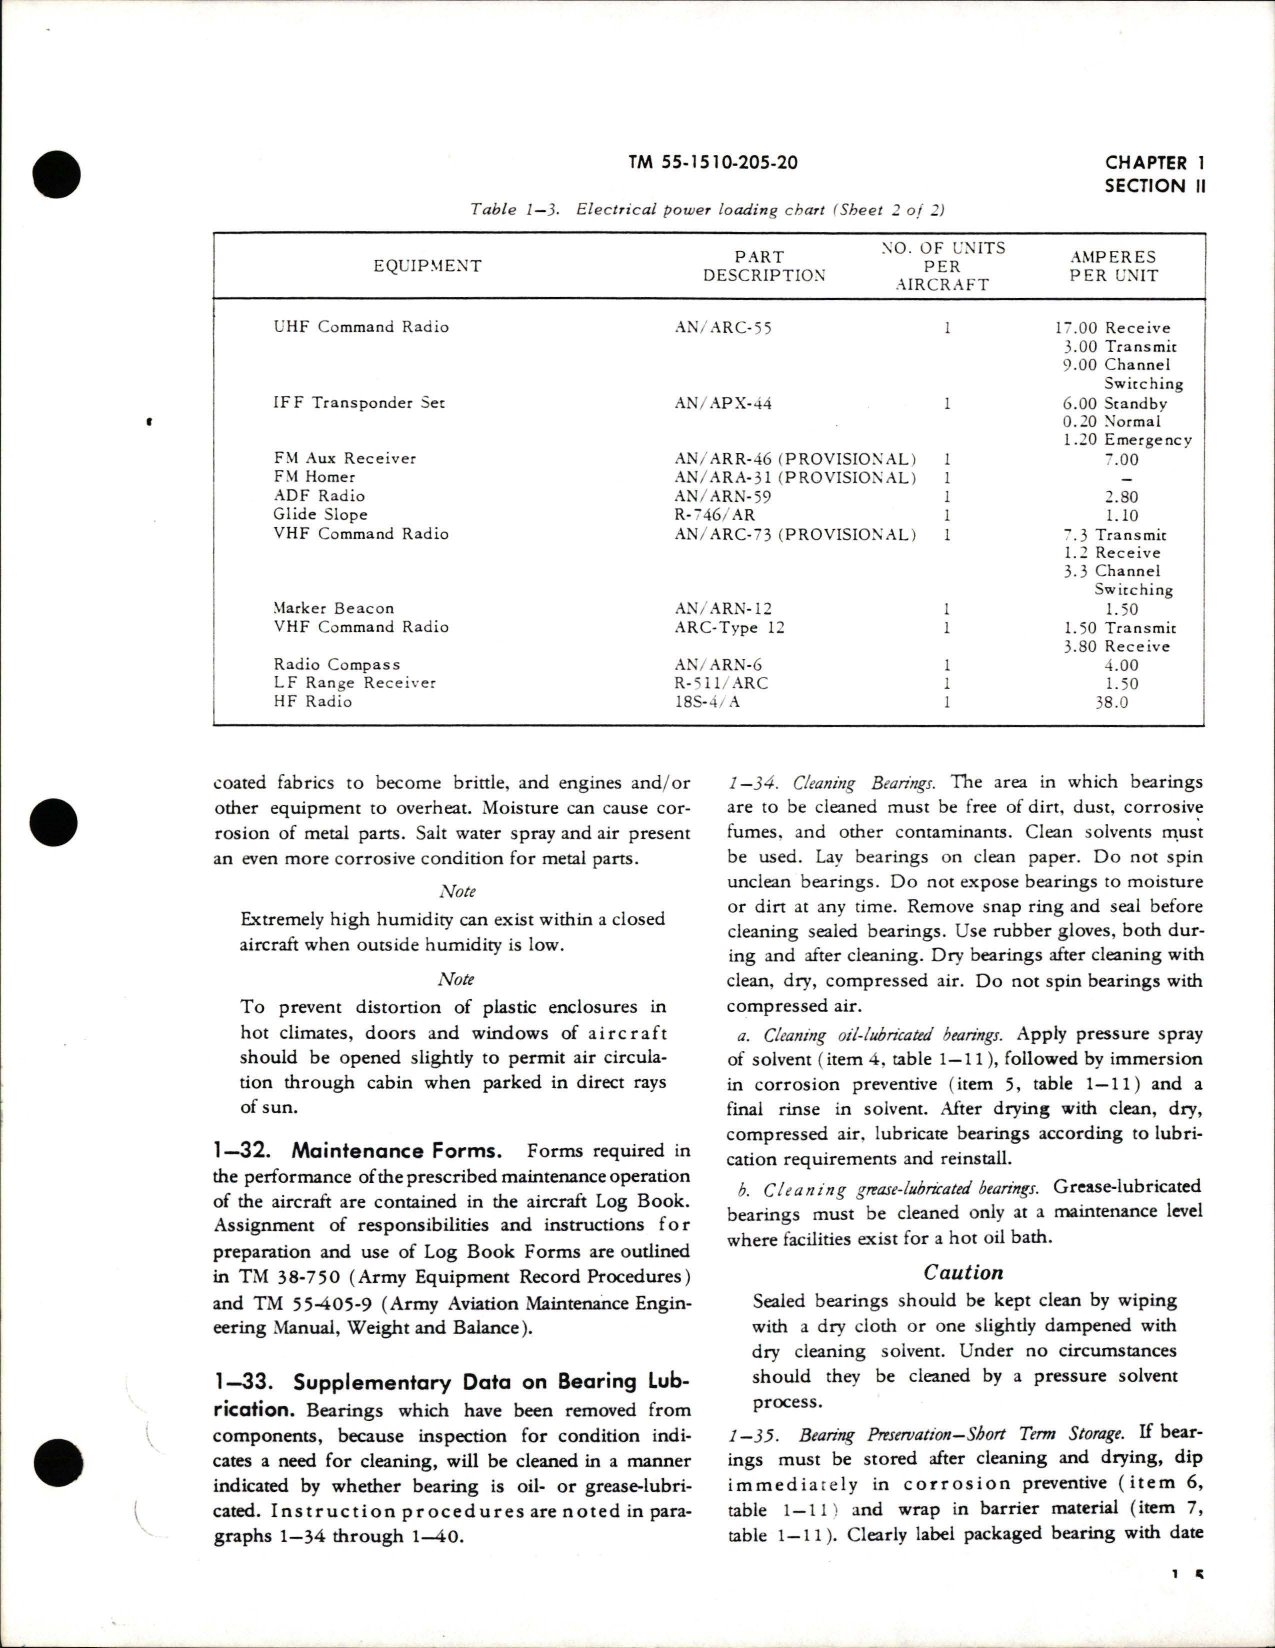 Sample page 9 from AirCorps Library document: Organizational Maintenance Manual for U-1A Otter